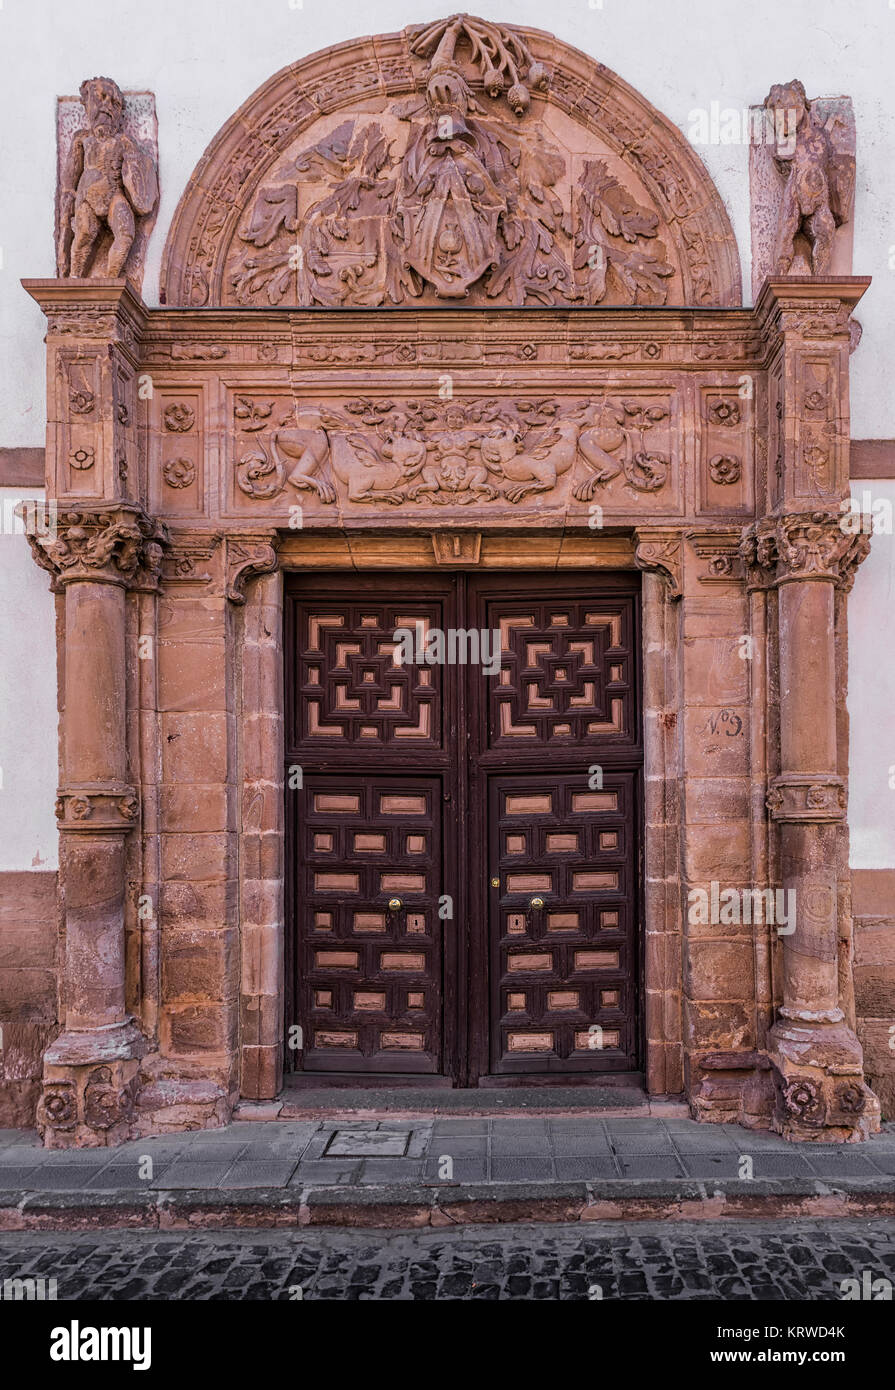 Door and facade of the sixteenth century, located in the historic town of Almagro. Spain. Stock Photo